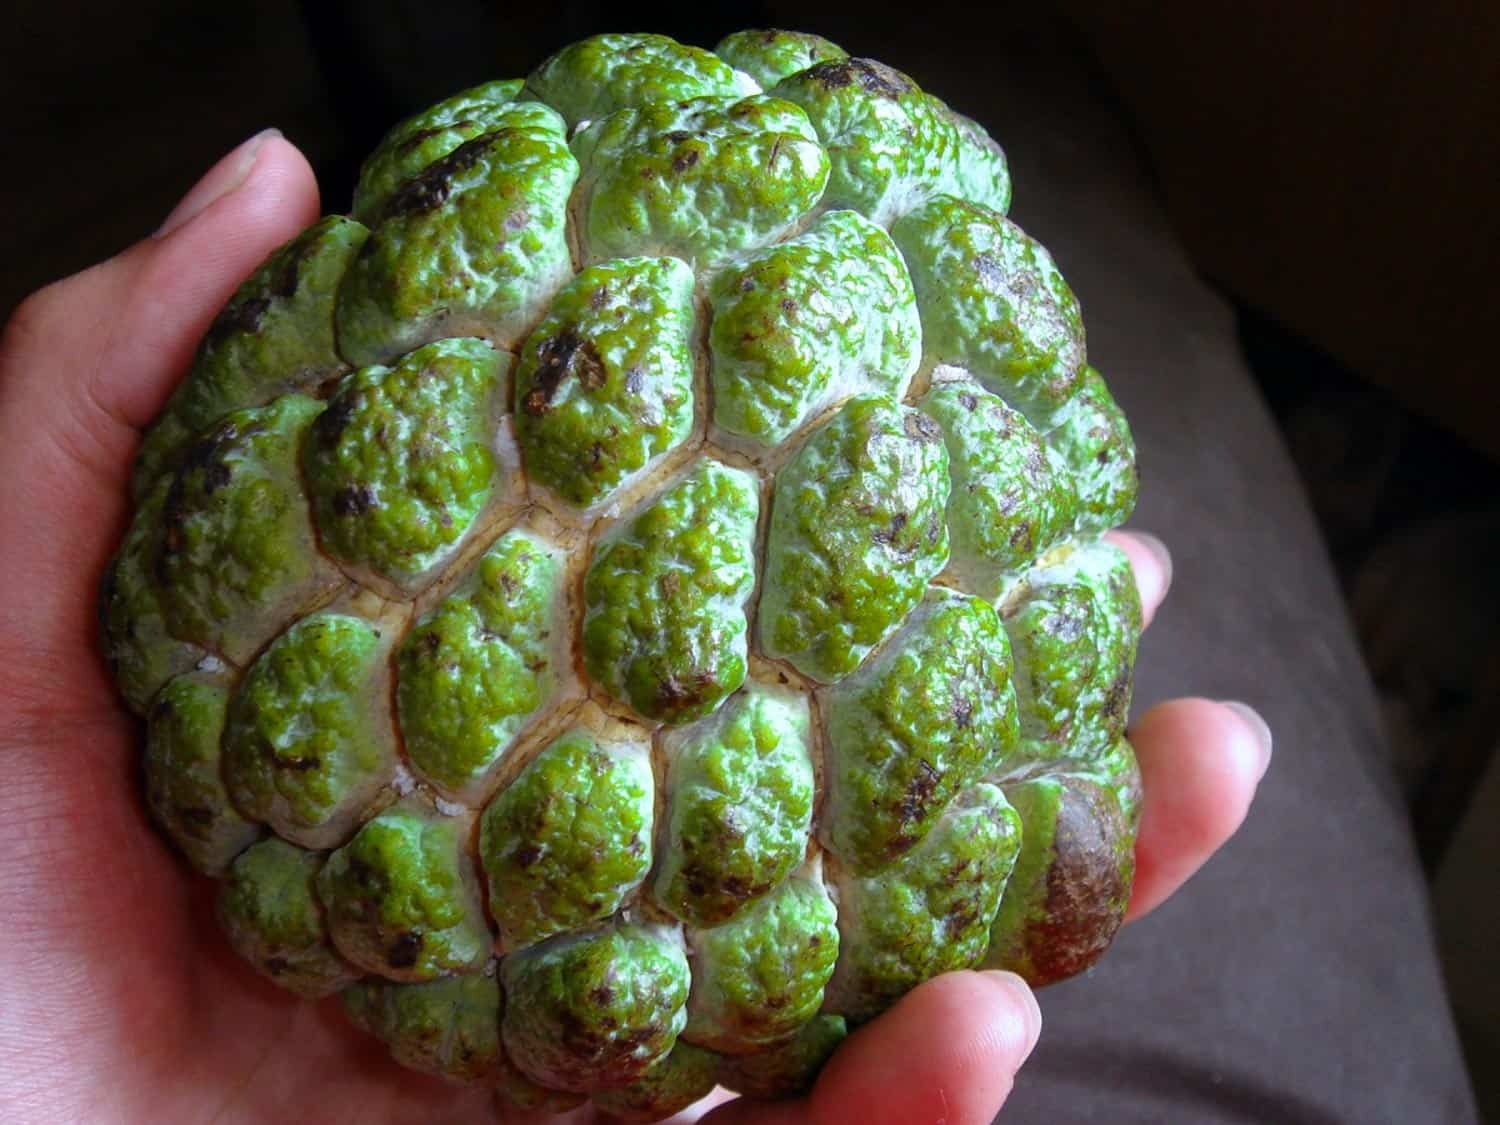 green exotic fruits